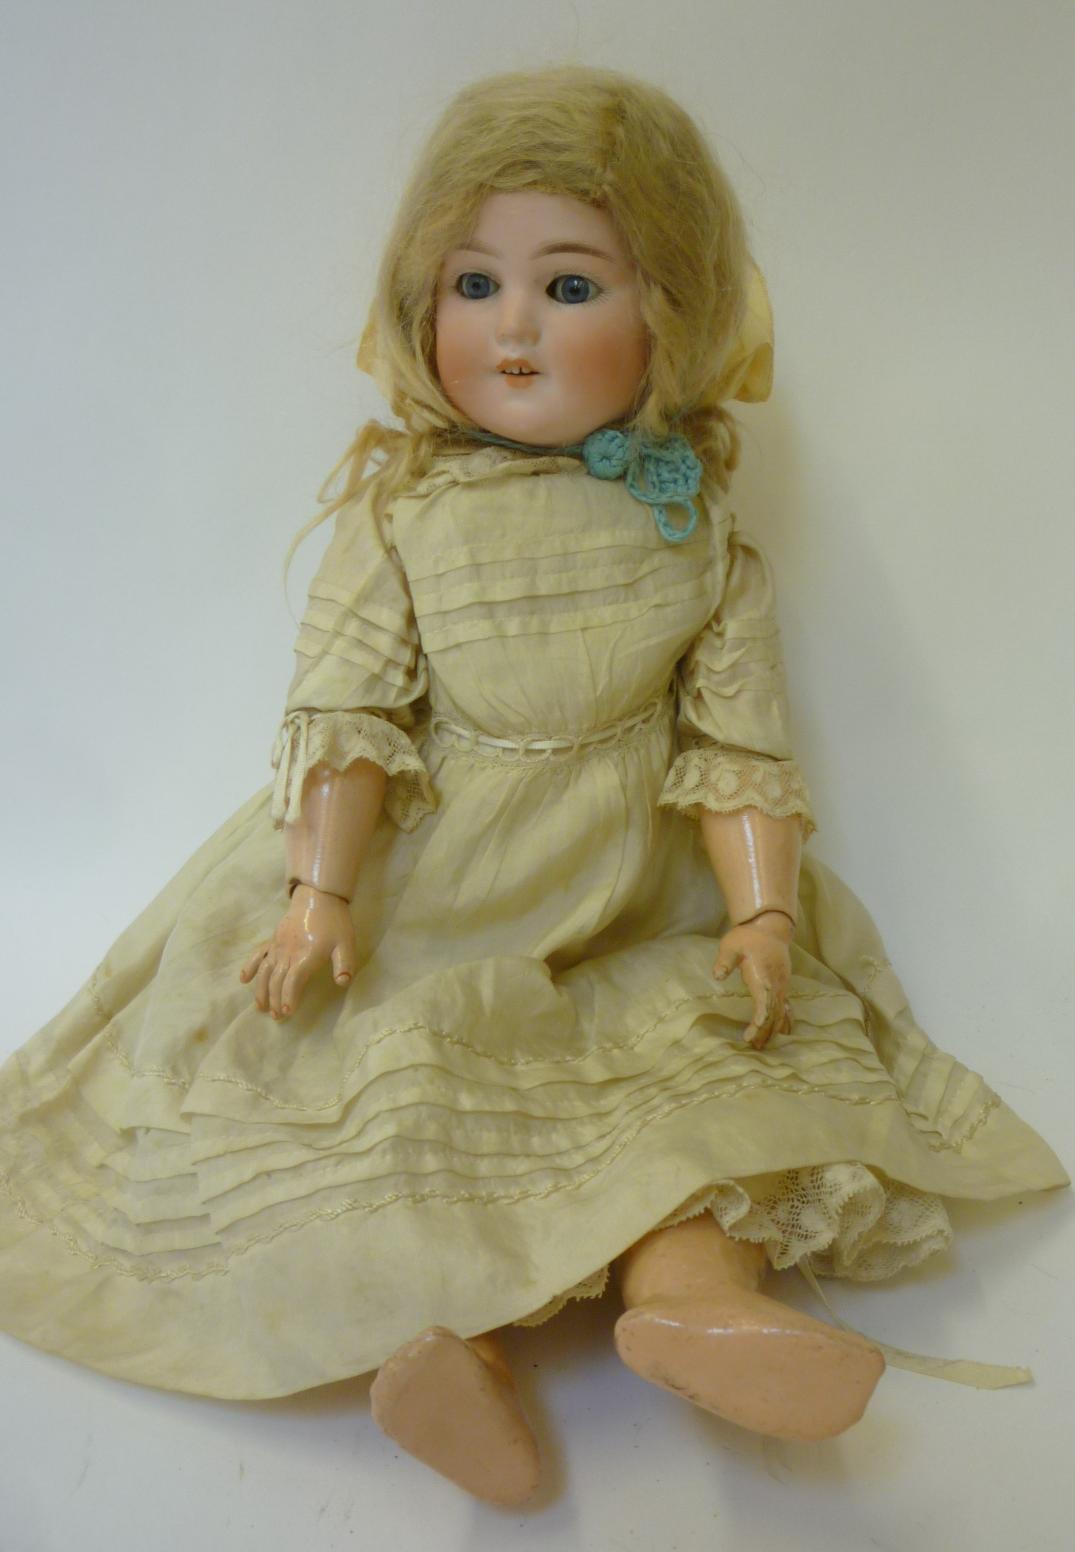 A Schoenau & Hoffmeister bisque head girl doll with blue glass sleeping eyes, open mouth and